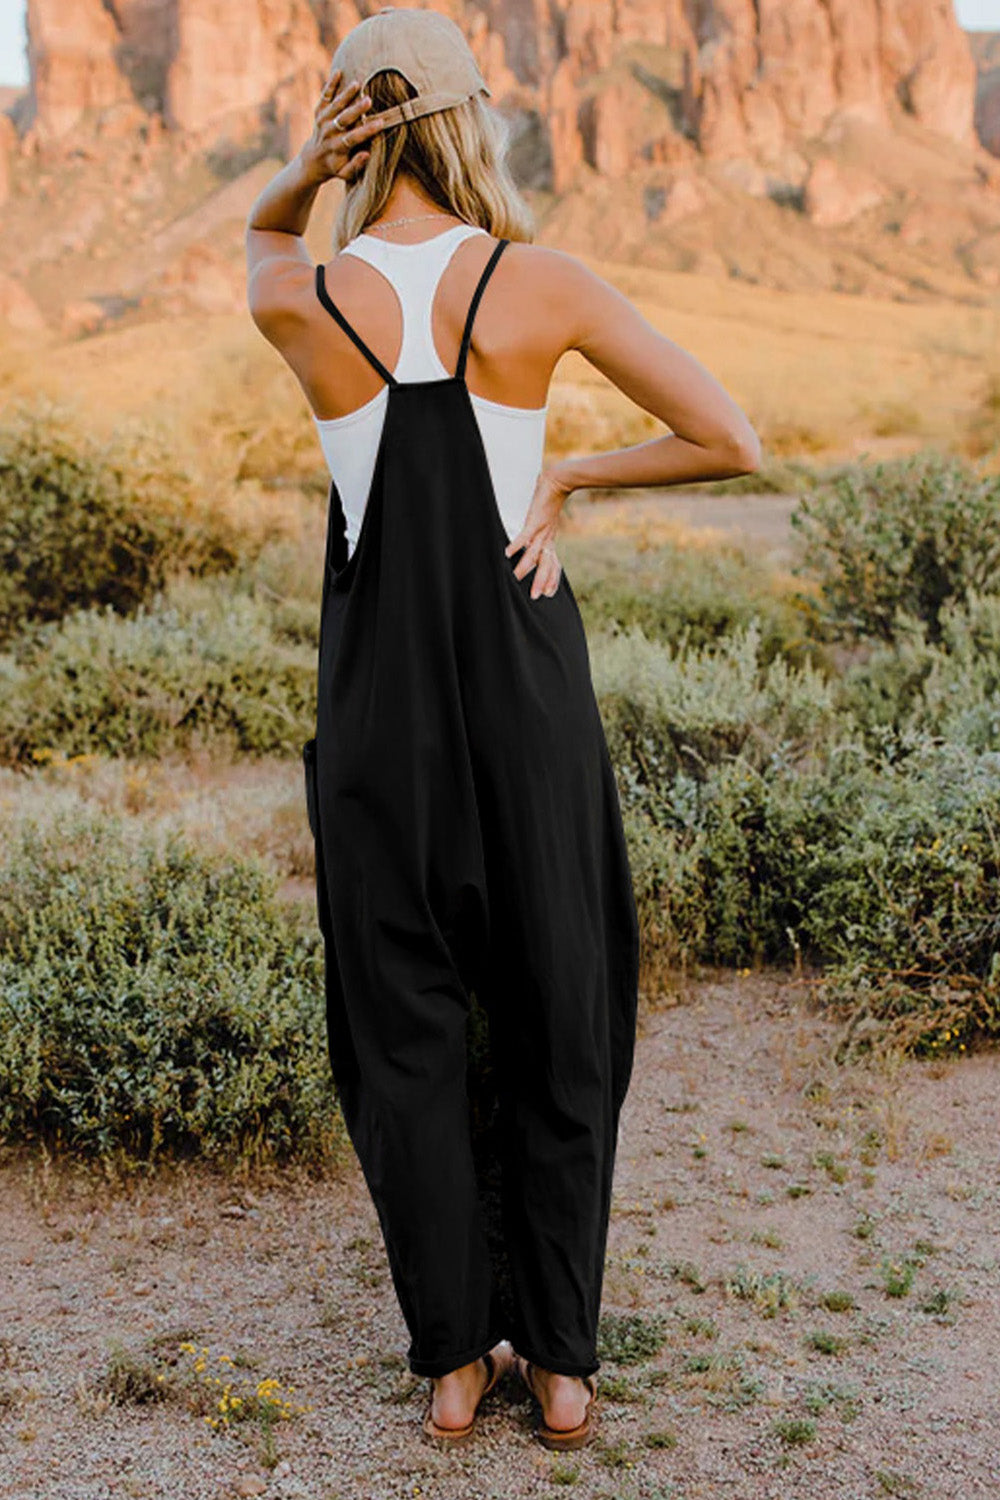 Solids V-Neck Sleeveless Jumpsuit with Pockets